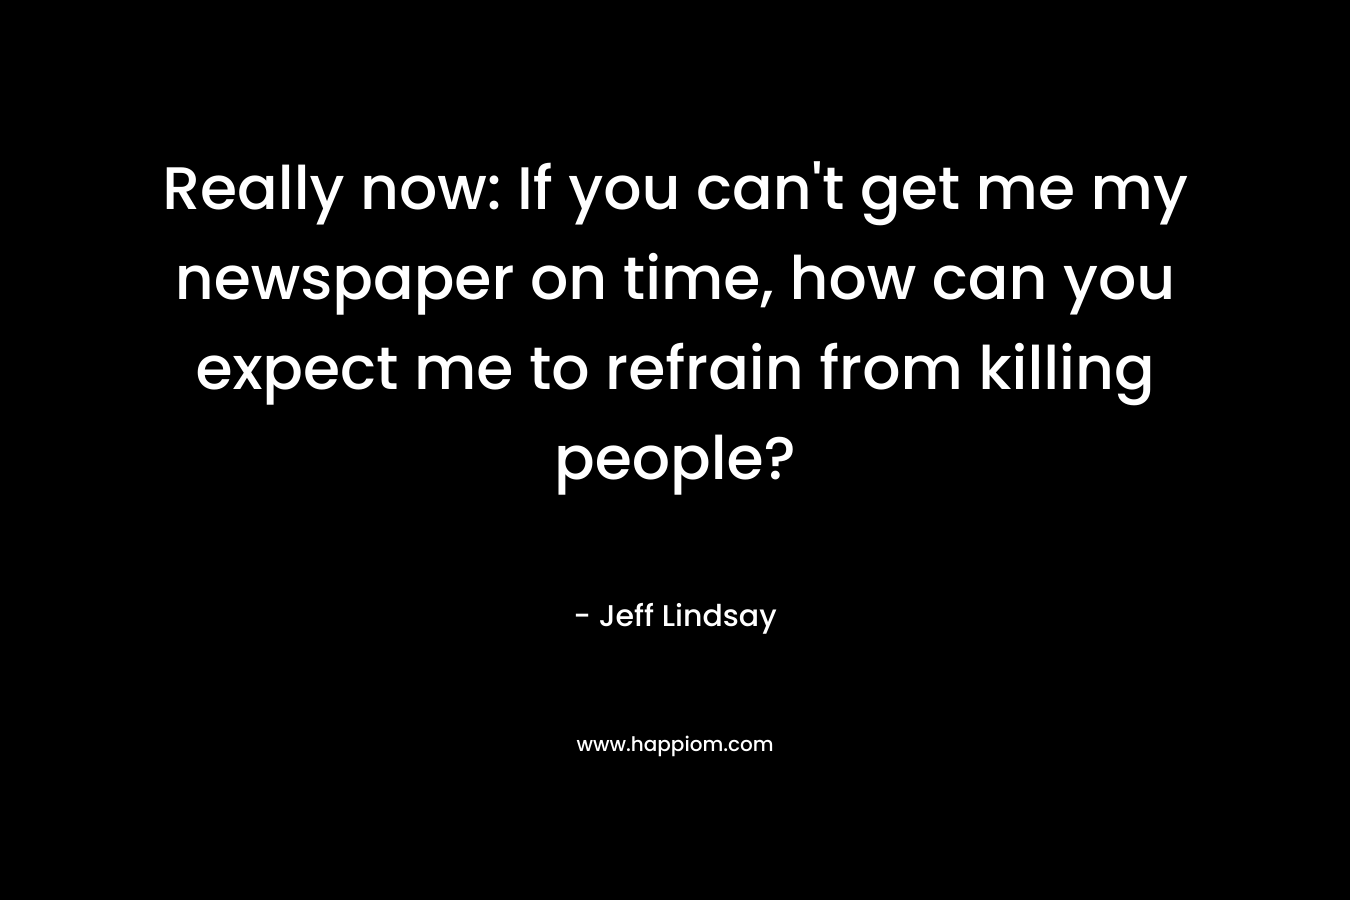 Really now: If you can’t get me my newspaper on time, how can you expect me to refrain from killing people? – Jeff Lindsay